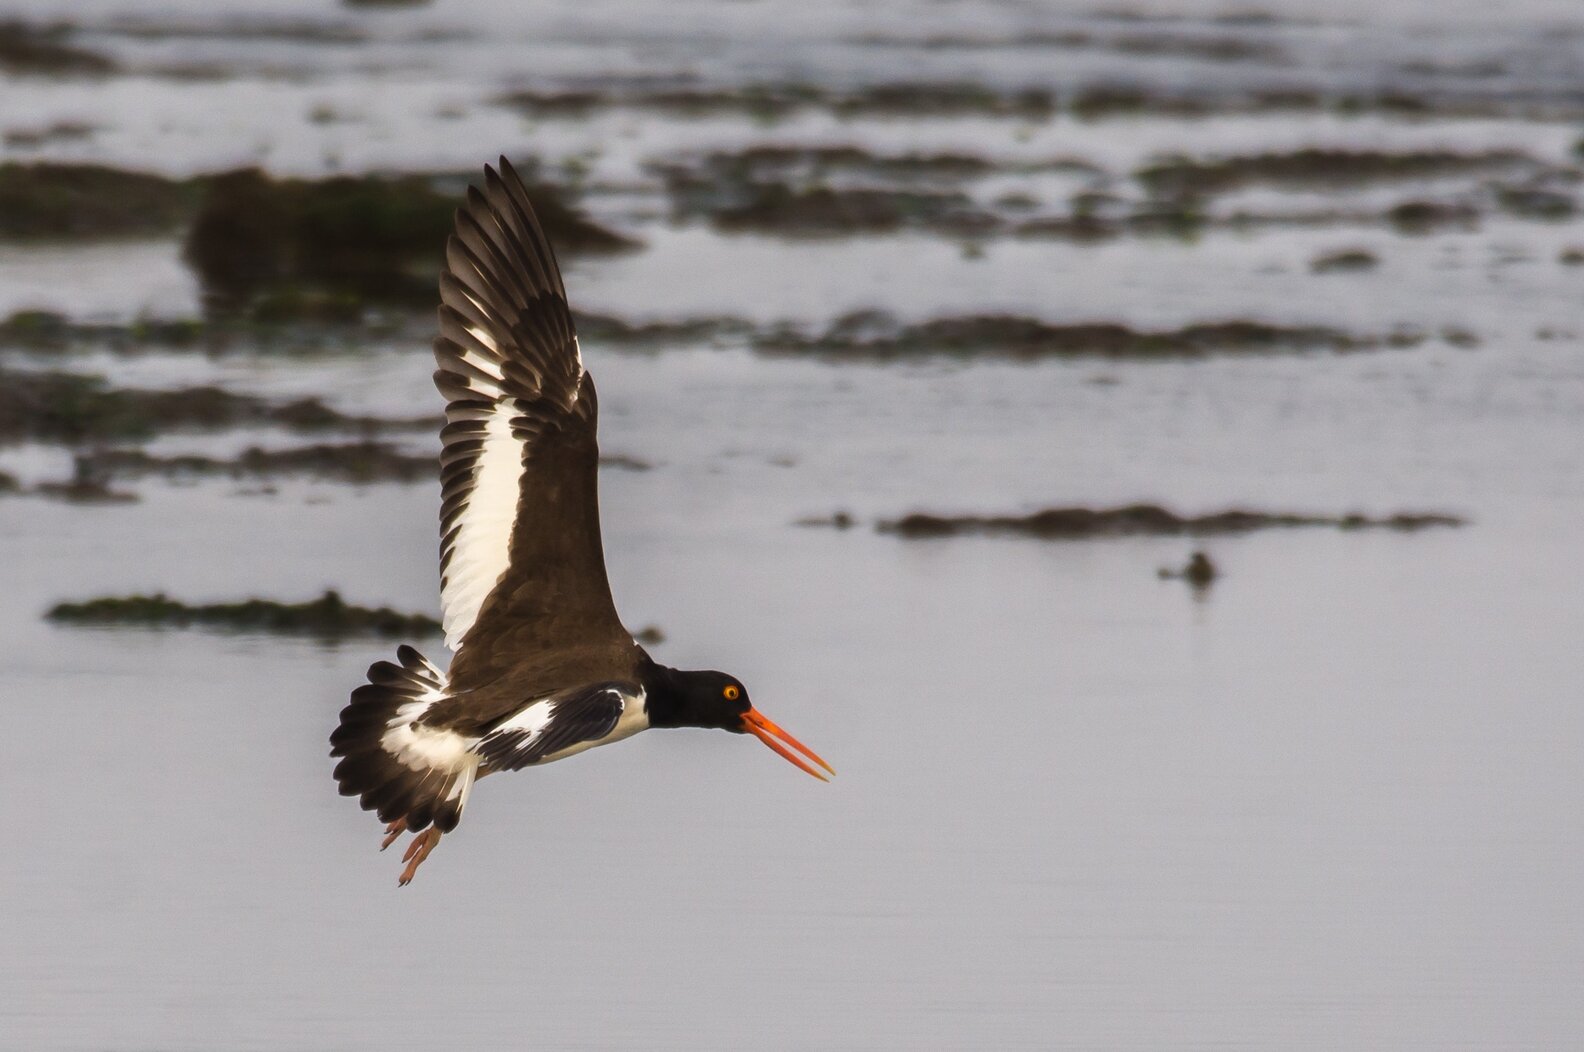 Look and listen for American Oystercatchers in Spring Creek Park. Photo: Lawrence Pugliares